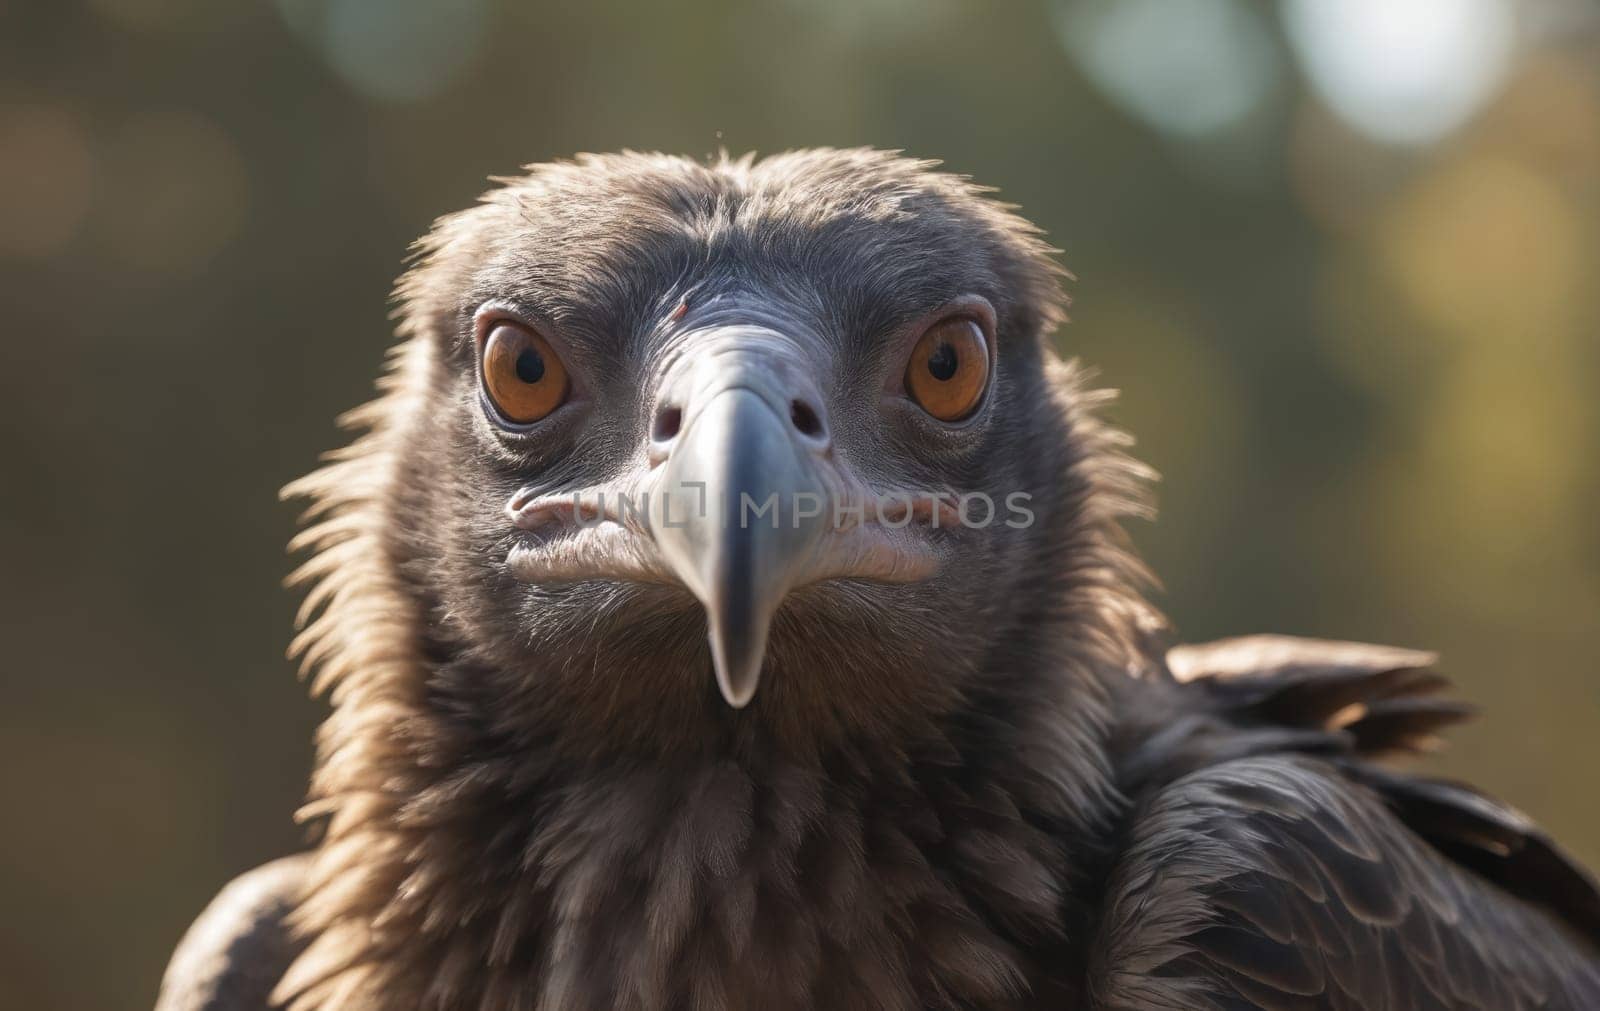 a close up of a vulture looking at the camera by Andre1ns